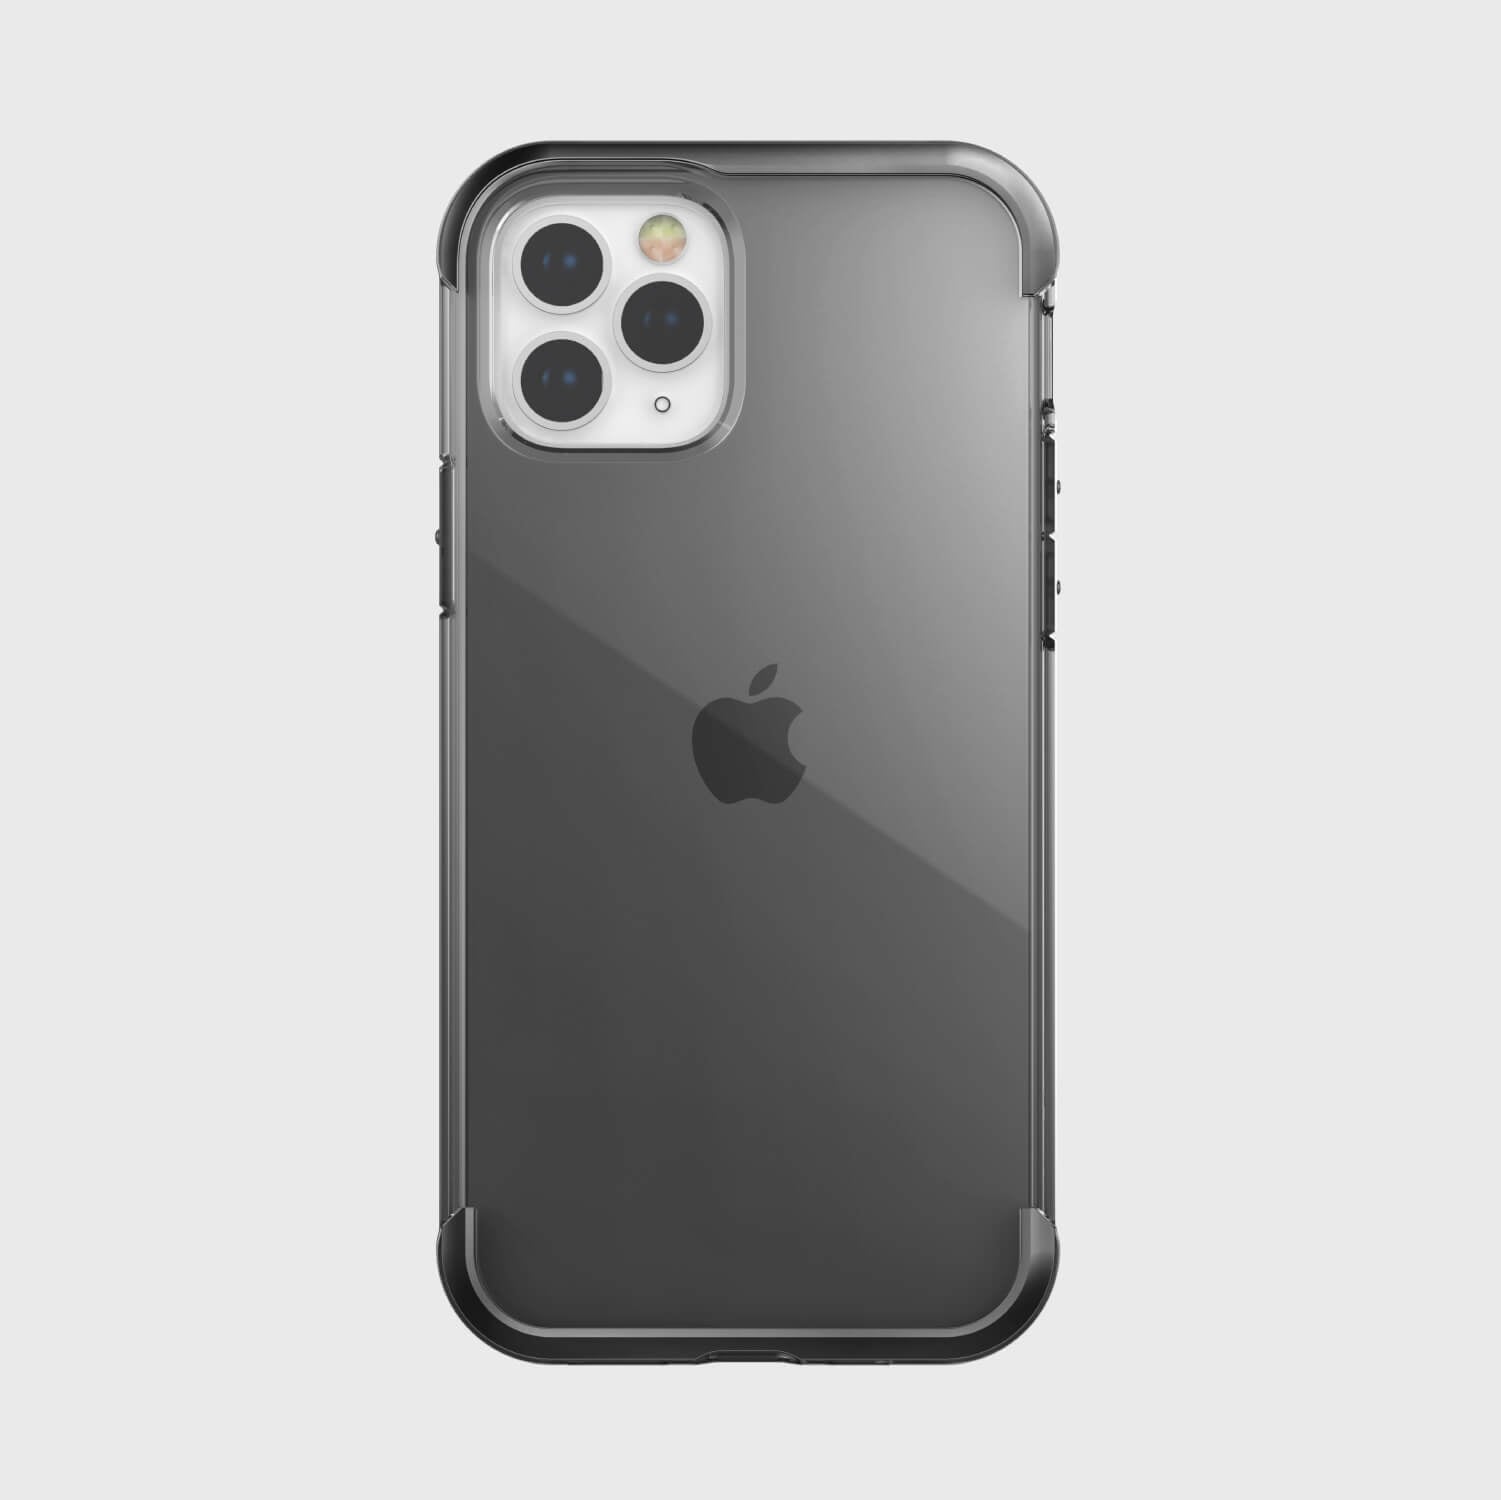 The back view of an iPhone 12 & iPhone 12 Pro case in black with Raptic Air, offering 13-foot drop protection.